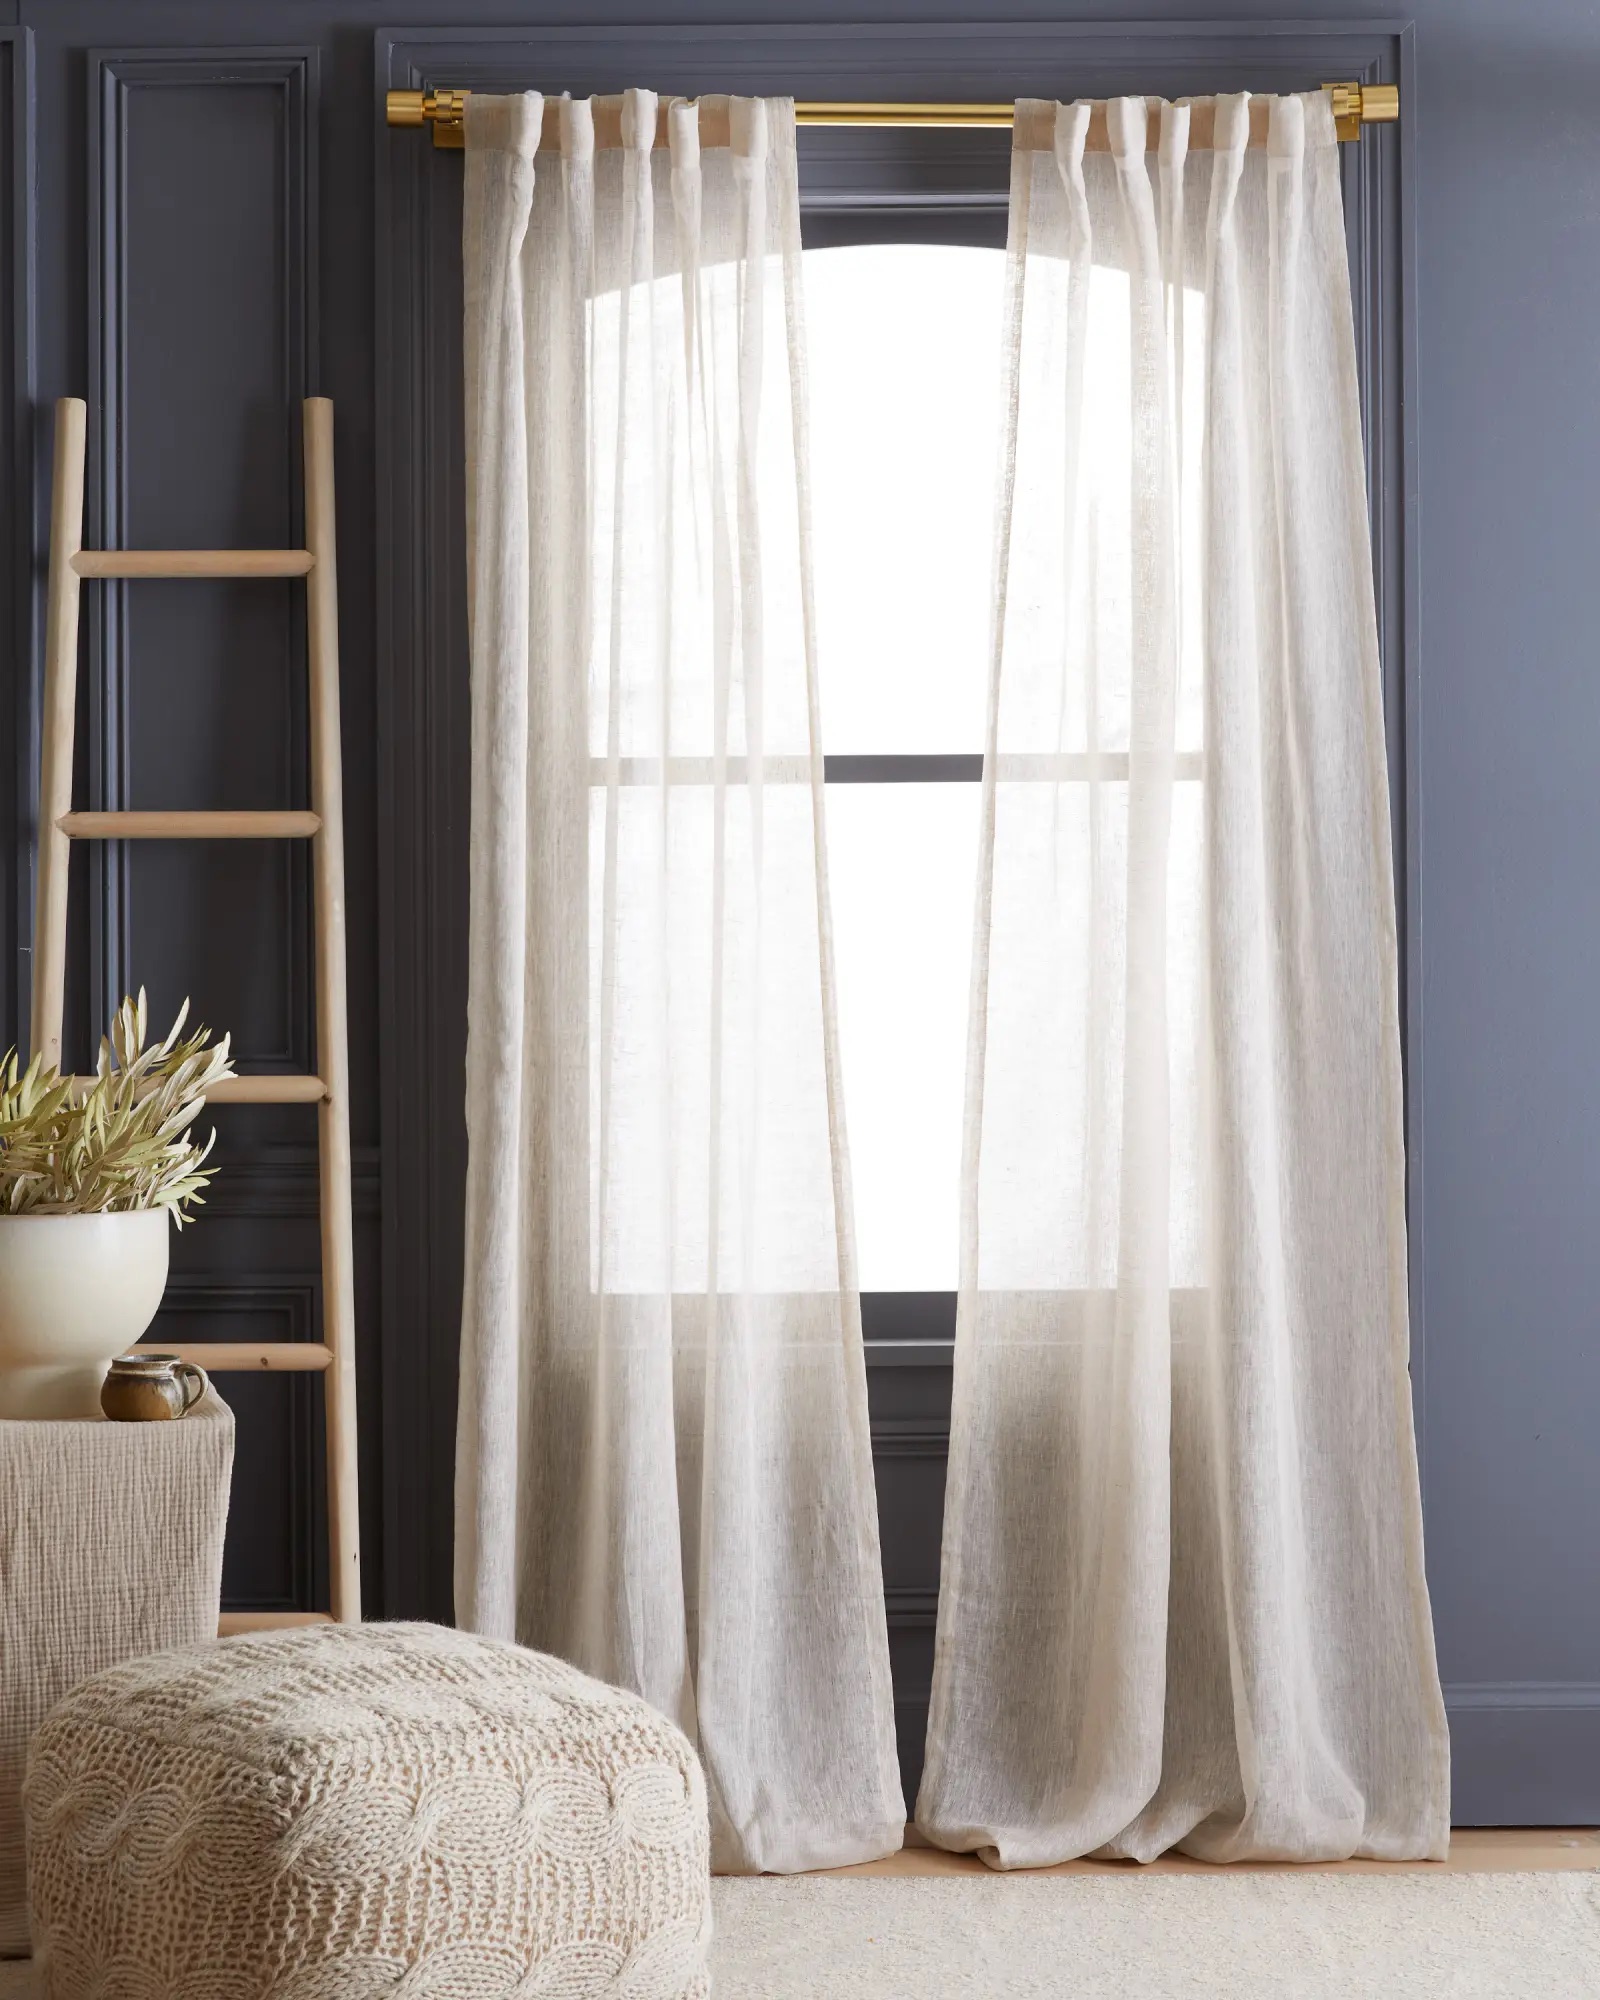 Sheer white curtains hanging on a gold curtain rod in front of a window, with a grey wall, a wooden ladder, and a beige ottoman.